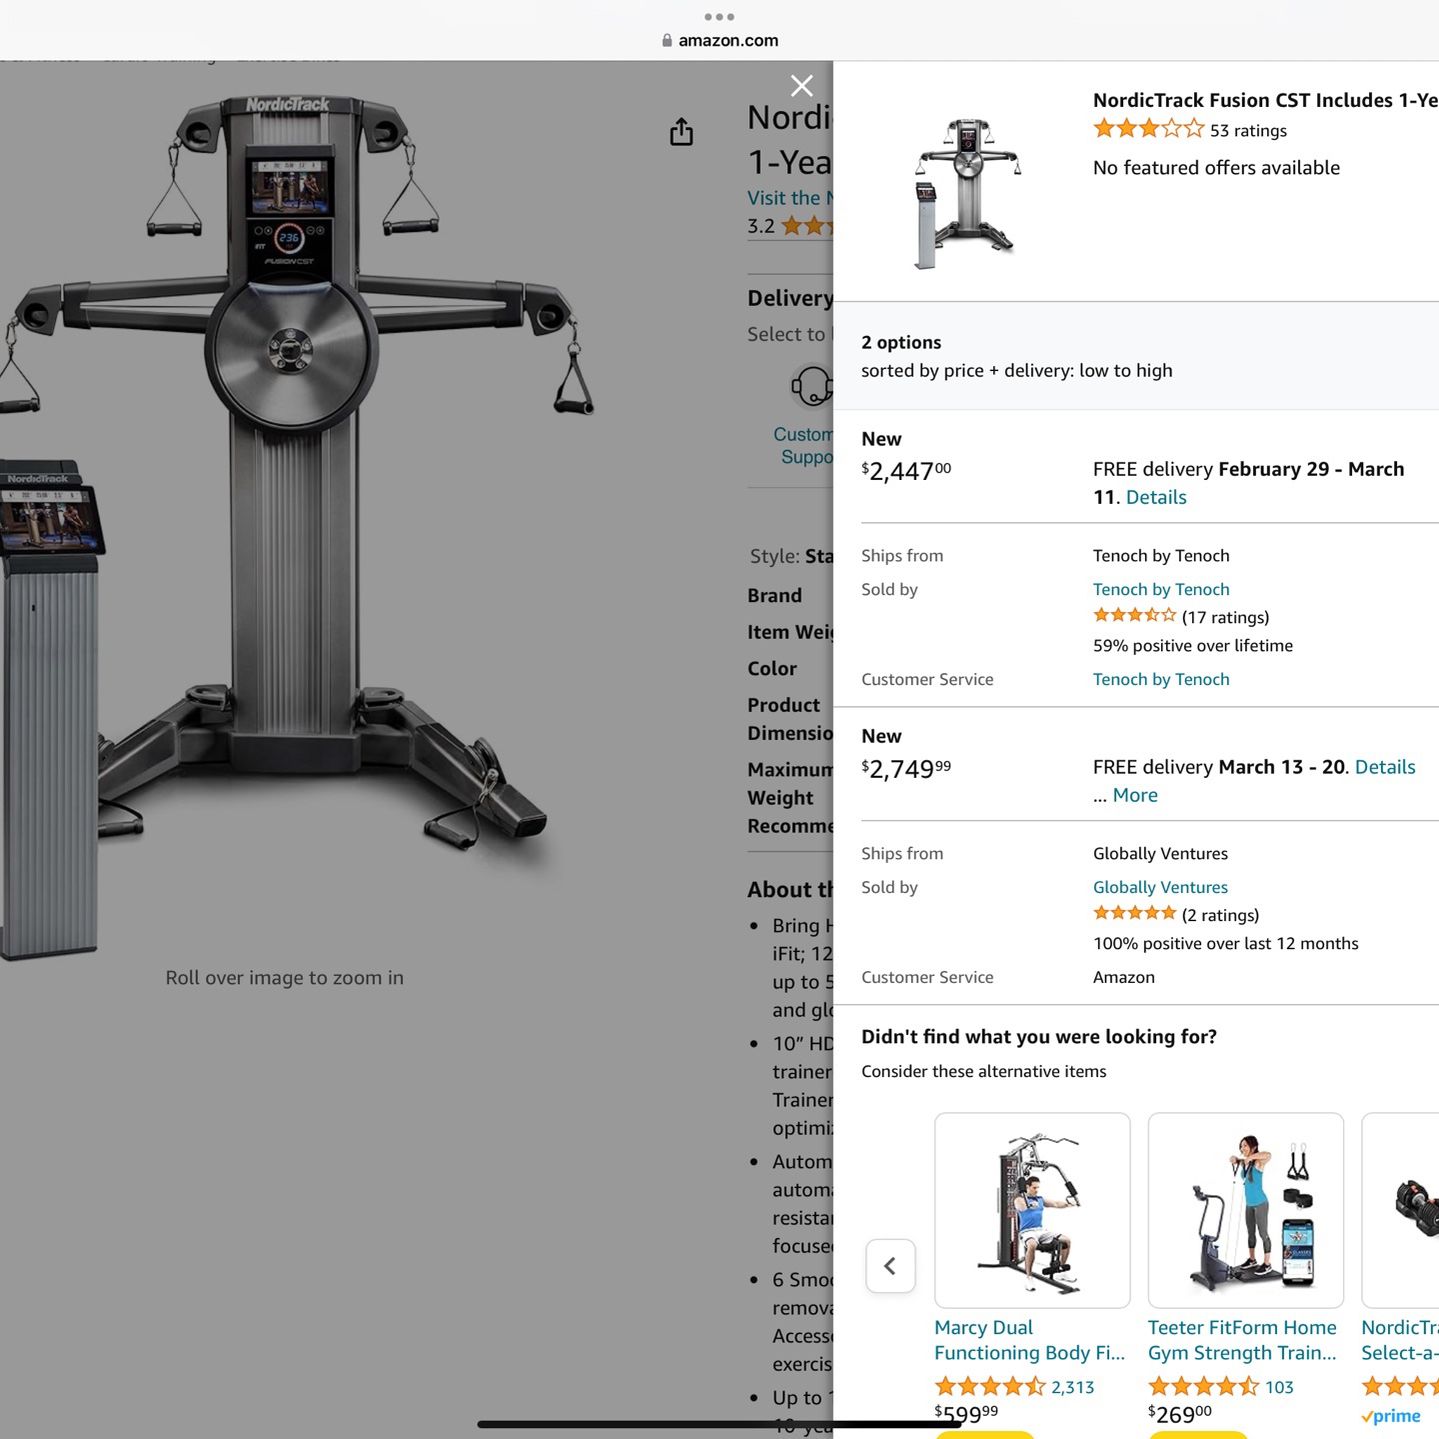 NEW NORDICTRACK I FIT WORKOUT Machine, Did Not Come With The 10i Tablet, But Everything Else.. Retails For $2400-$2700 